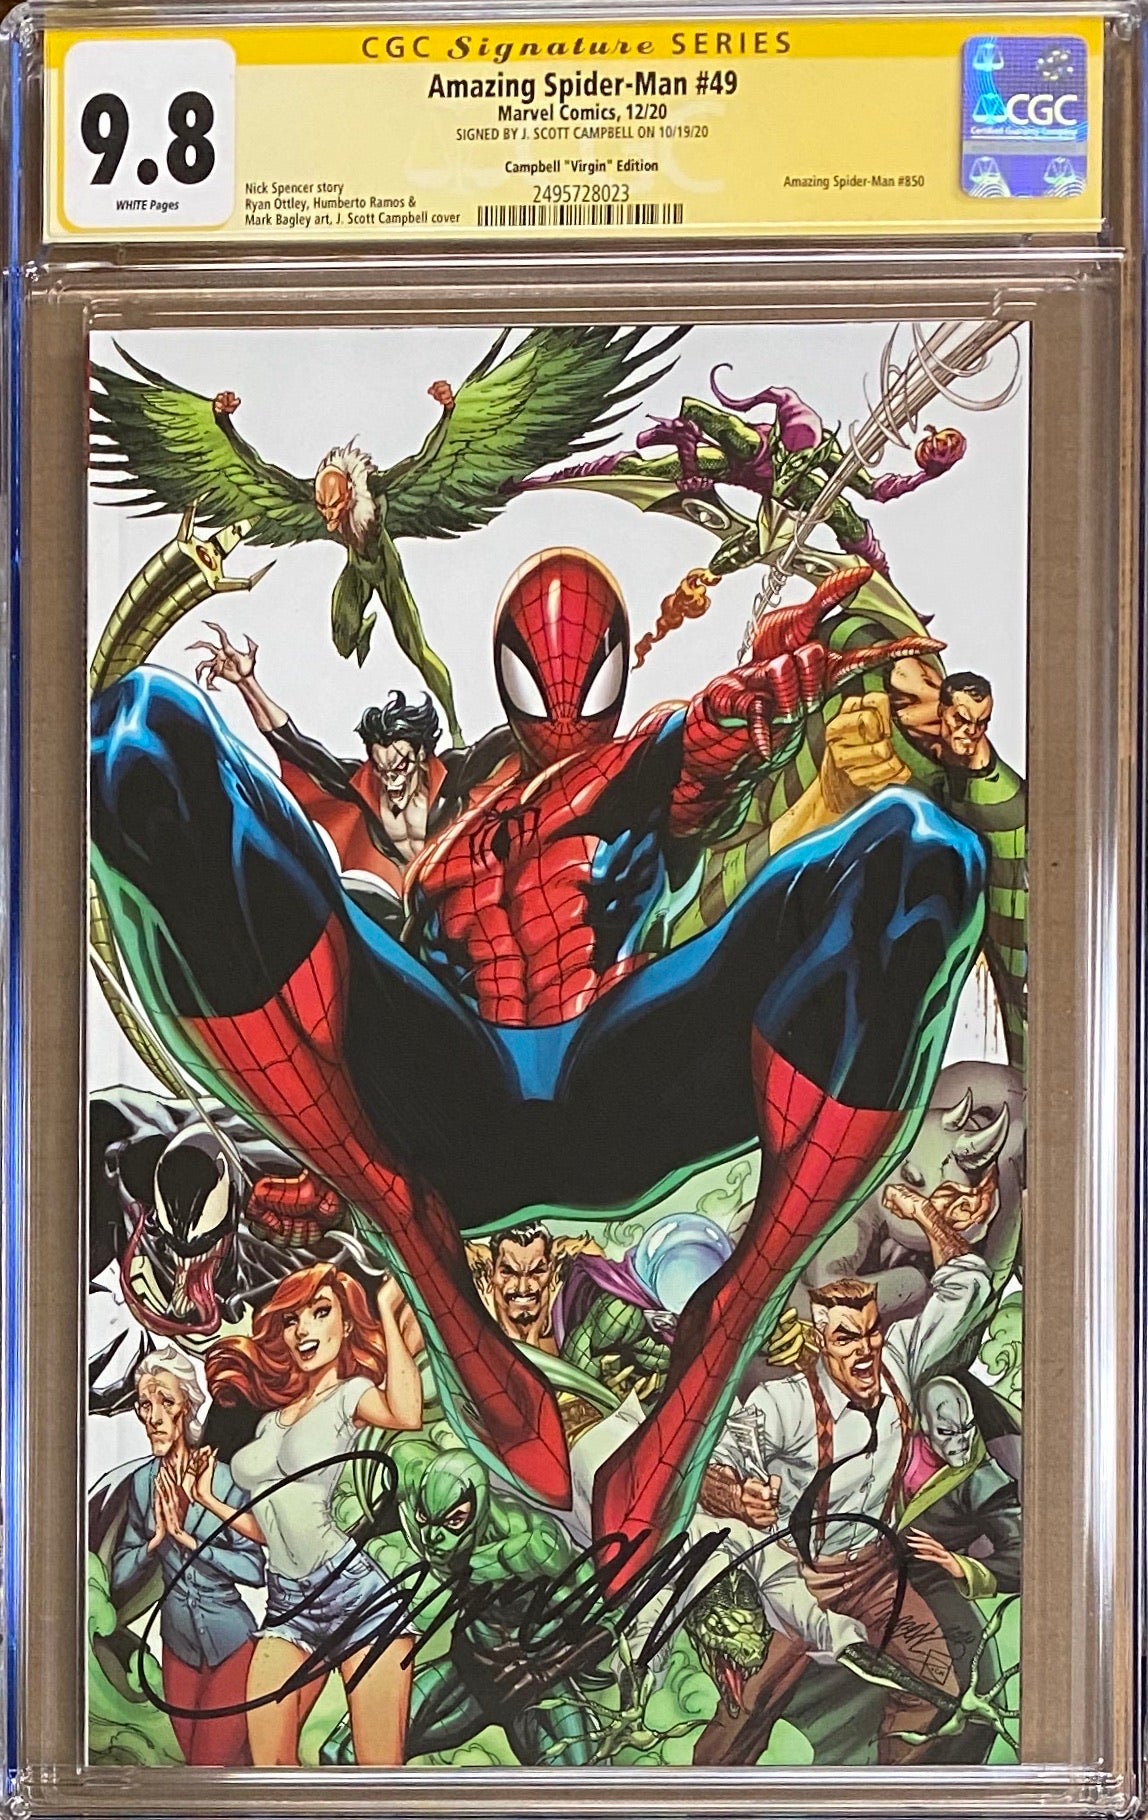 Amazing Spider-Man #850 (#49) Campbell 1:500 Virgin Retailer Incentive Variant CGC 9.8 SS